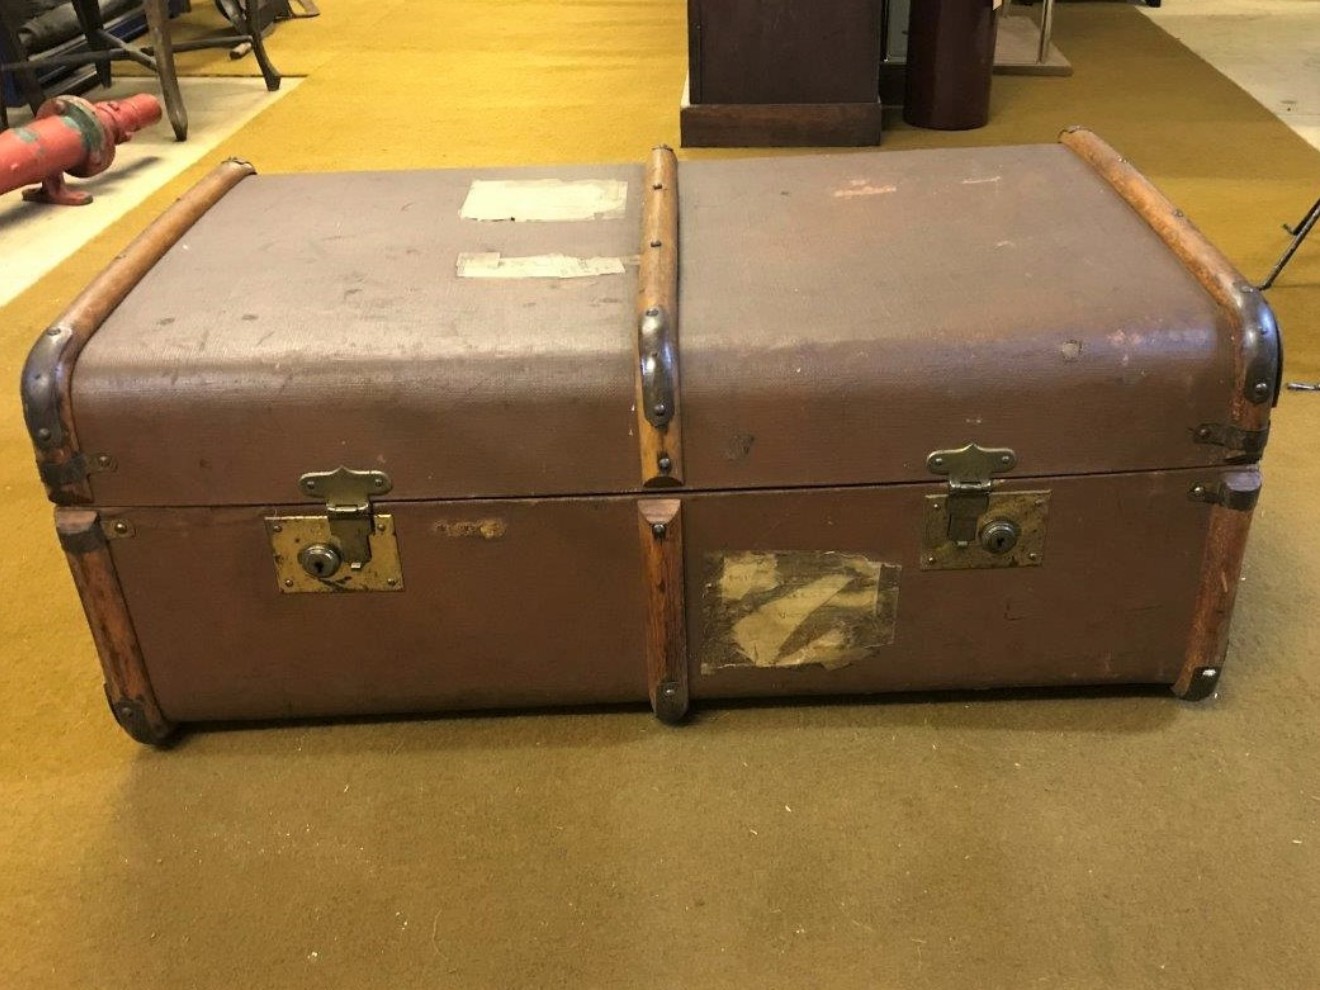 Classic steamer trunks from Scotland